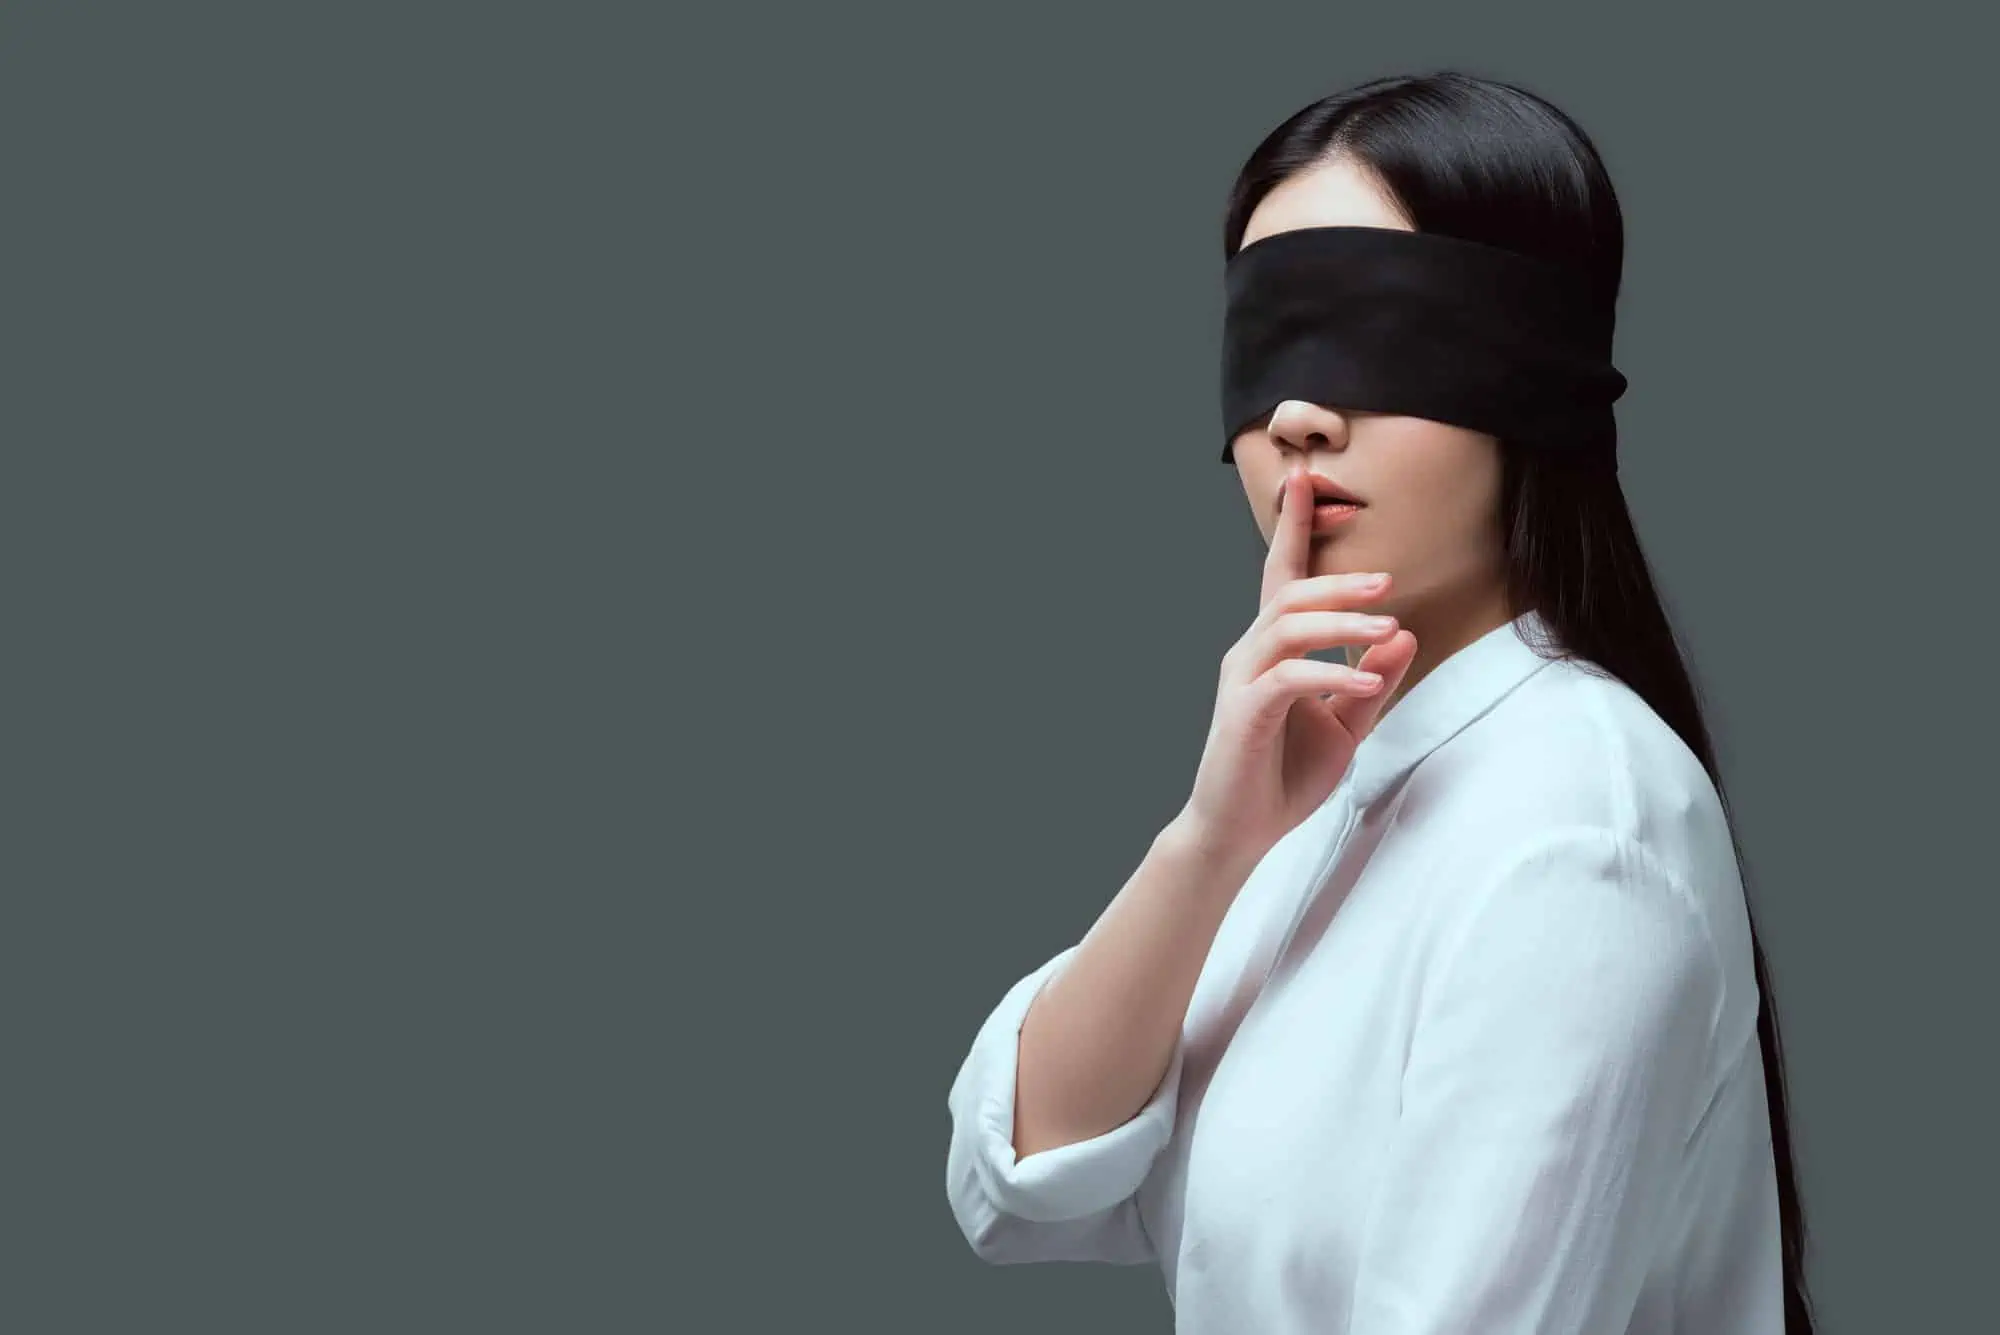 A woman with a blindfold on her face